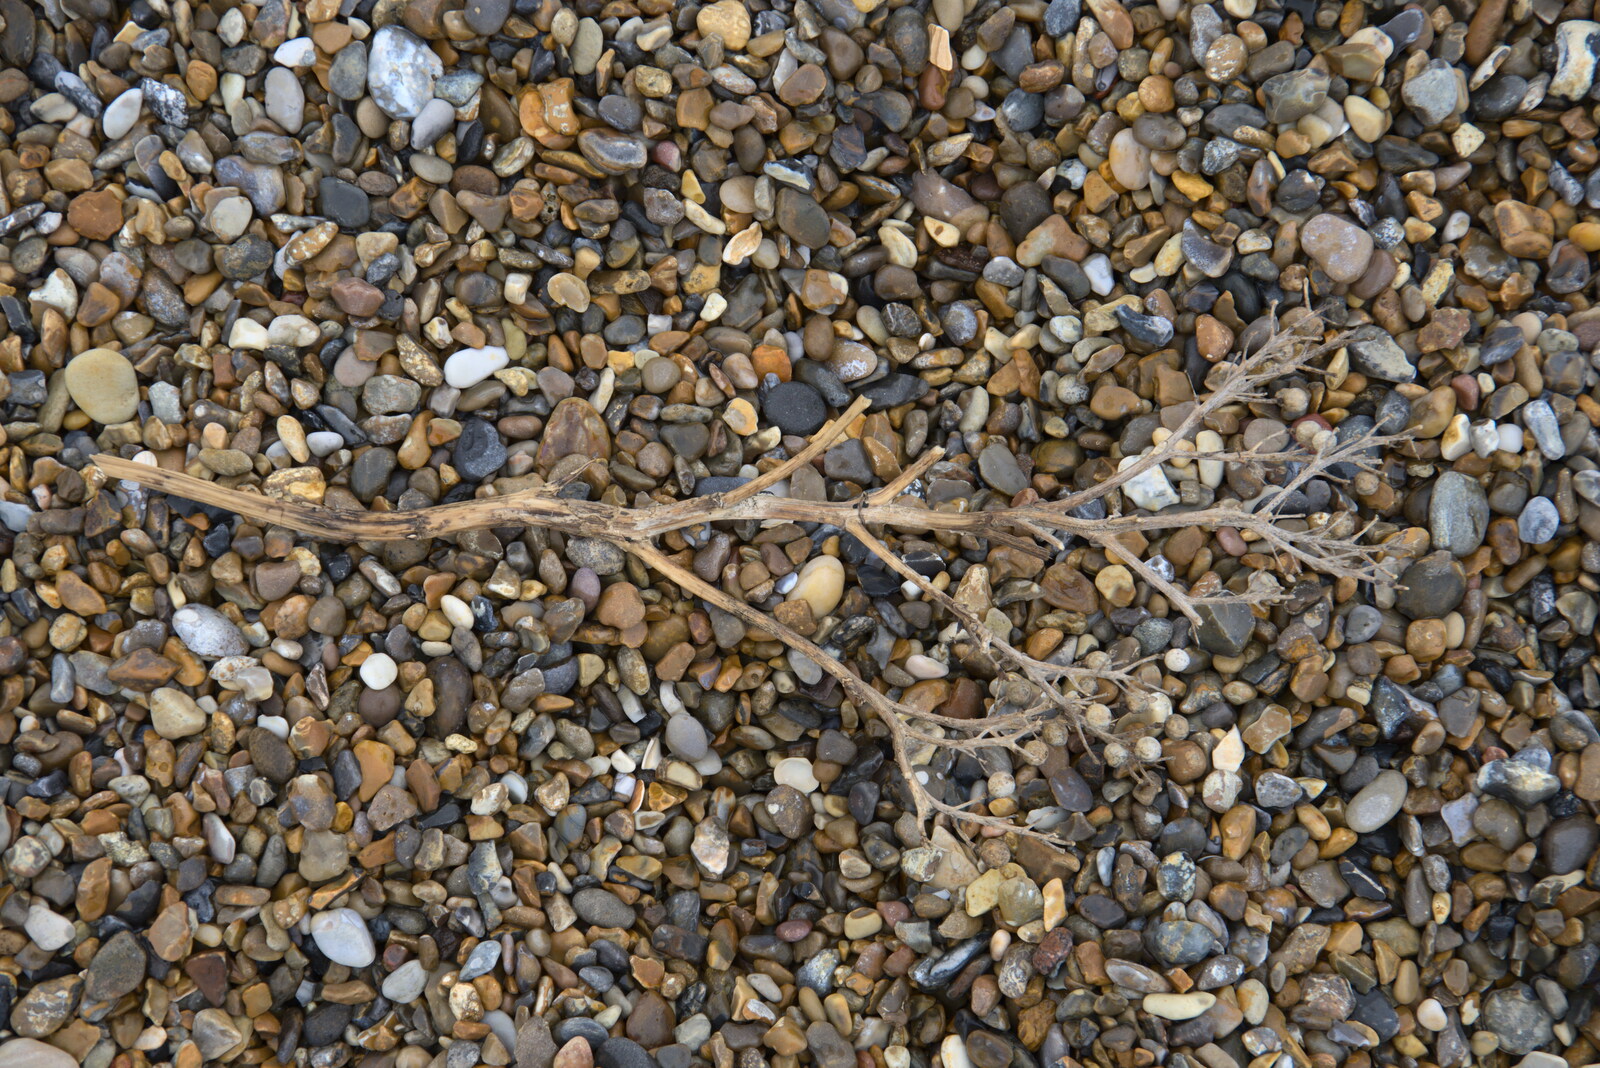 A dried twig from Sizewell Beach and the Lion Pub, Sizewell and Theberton, Suffolk - 4th October 2020